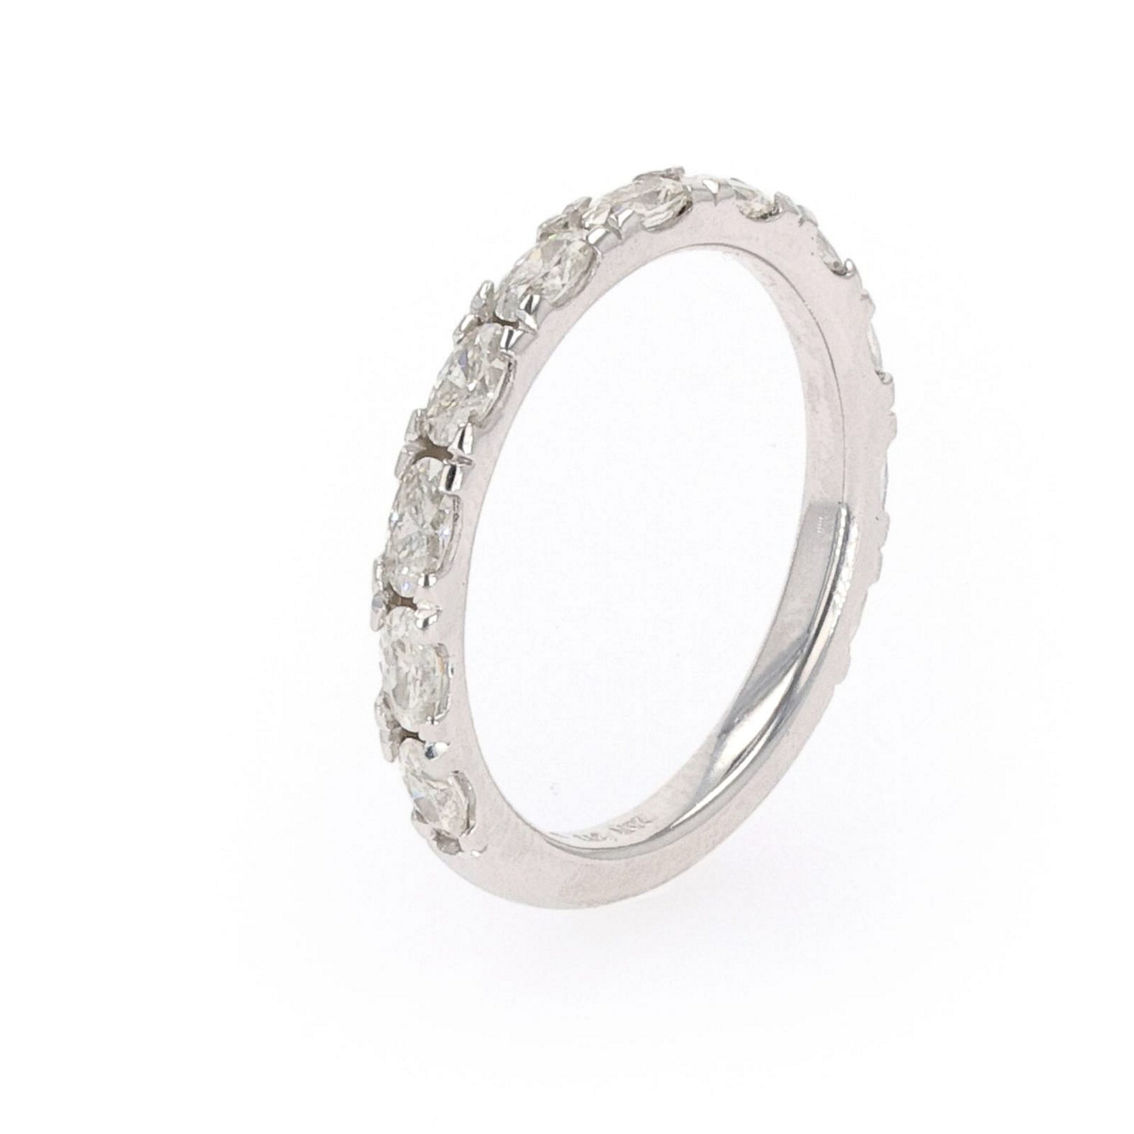 Charles & Colvard 1.10cttw Moissanite Band in Sterling Silver - Image 3 of 5